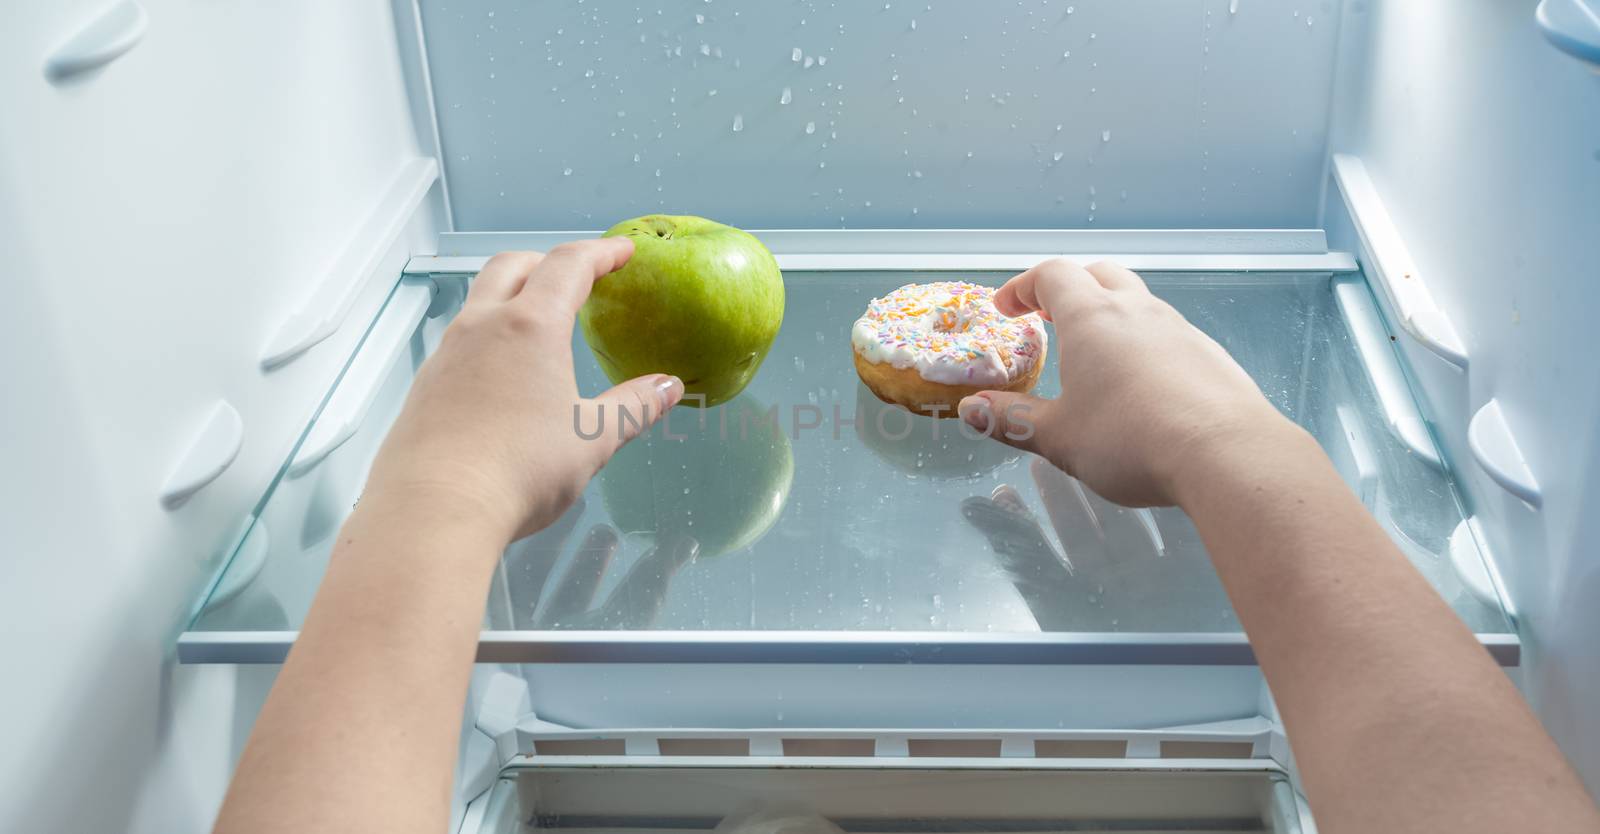 Closeup portrait of hands taking green apple and donut from fridge